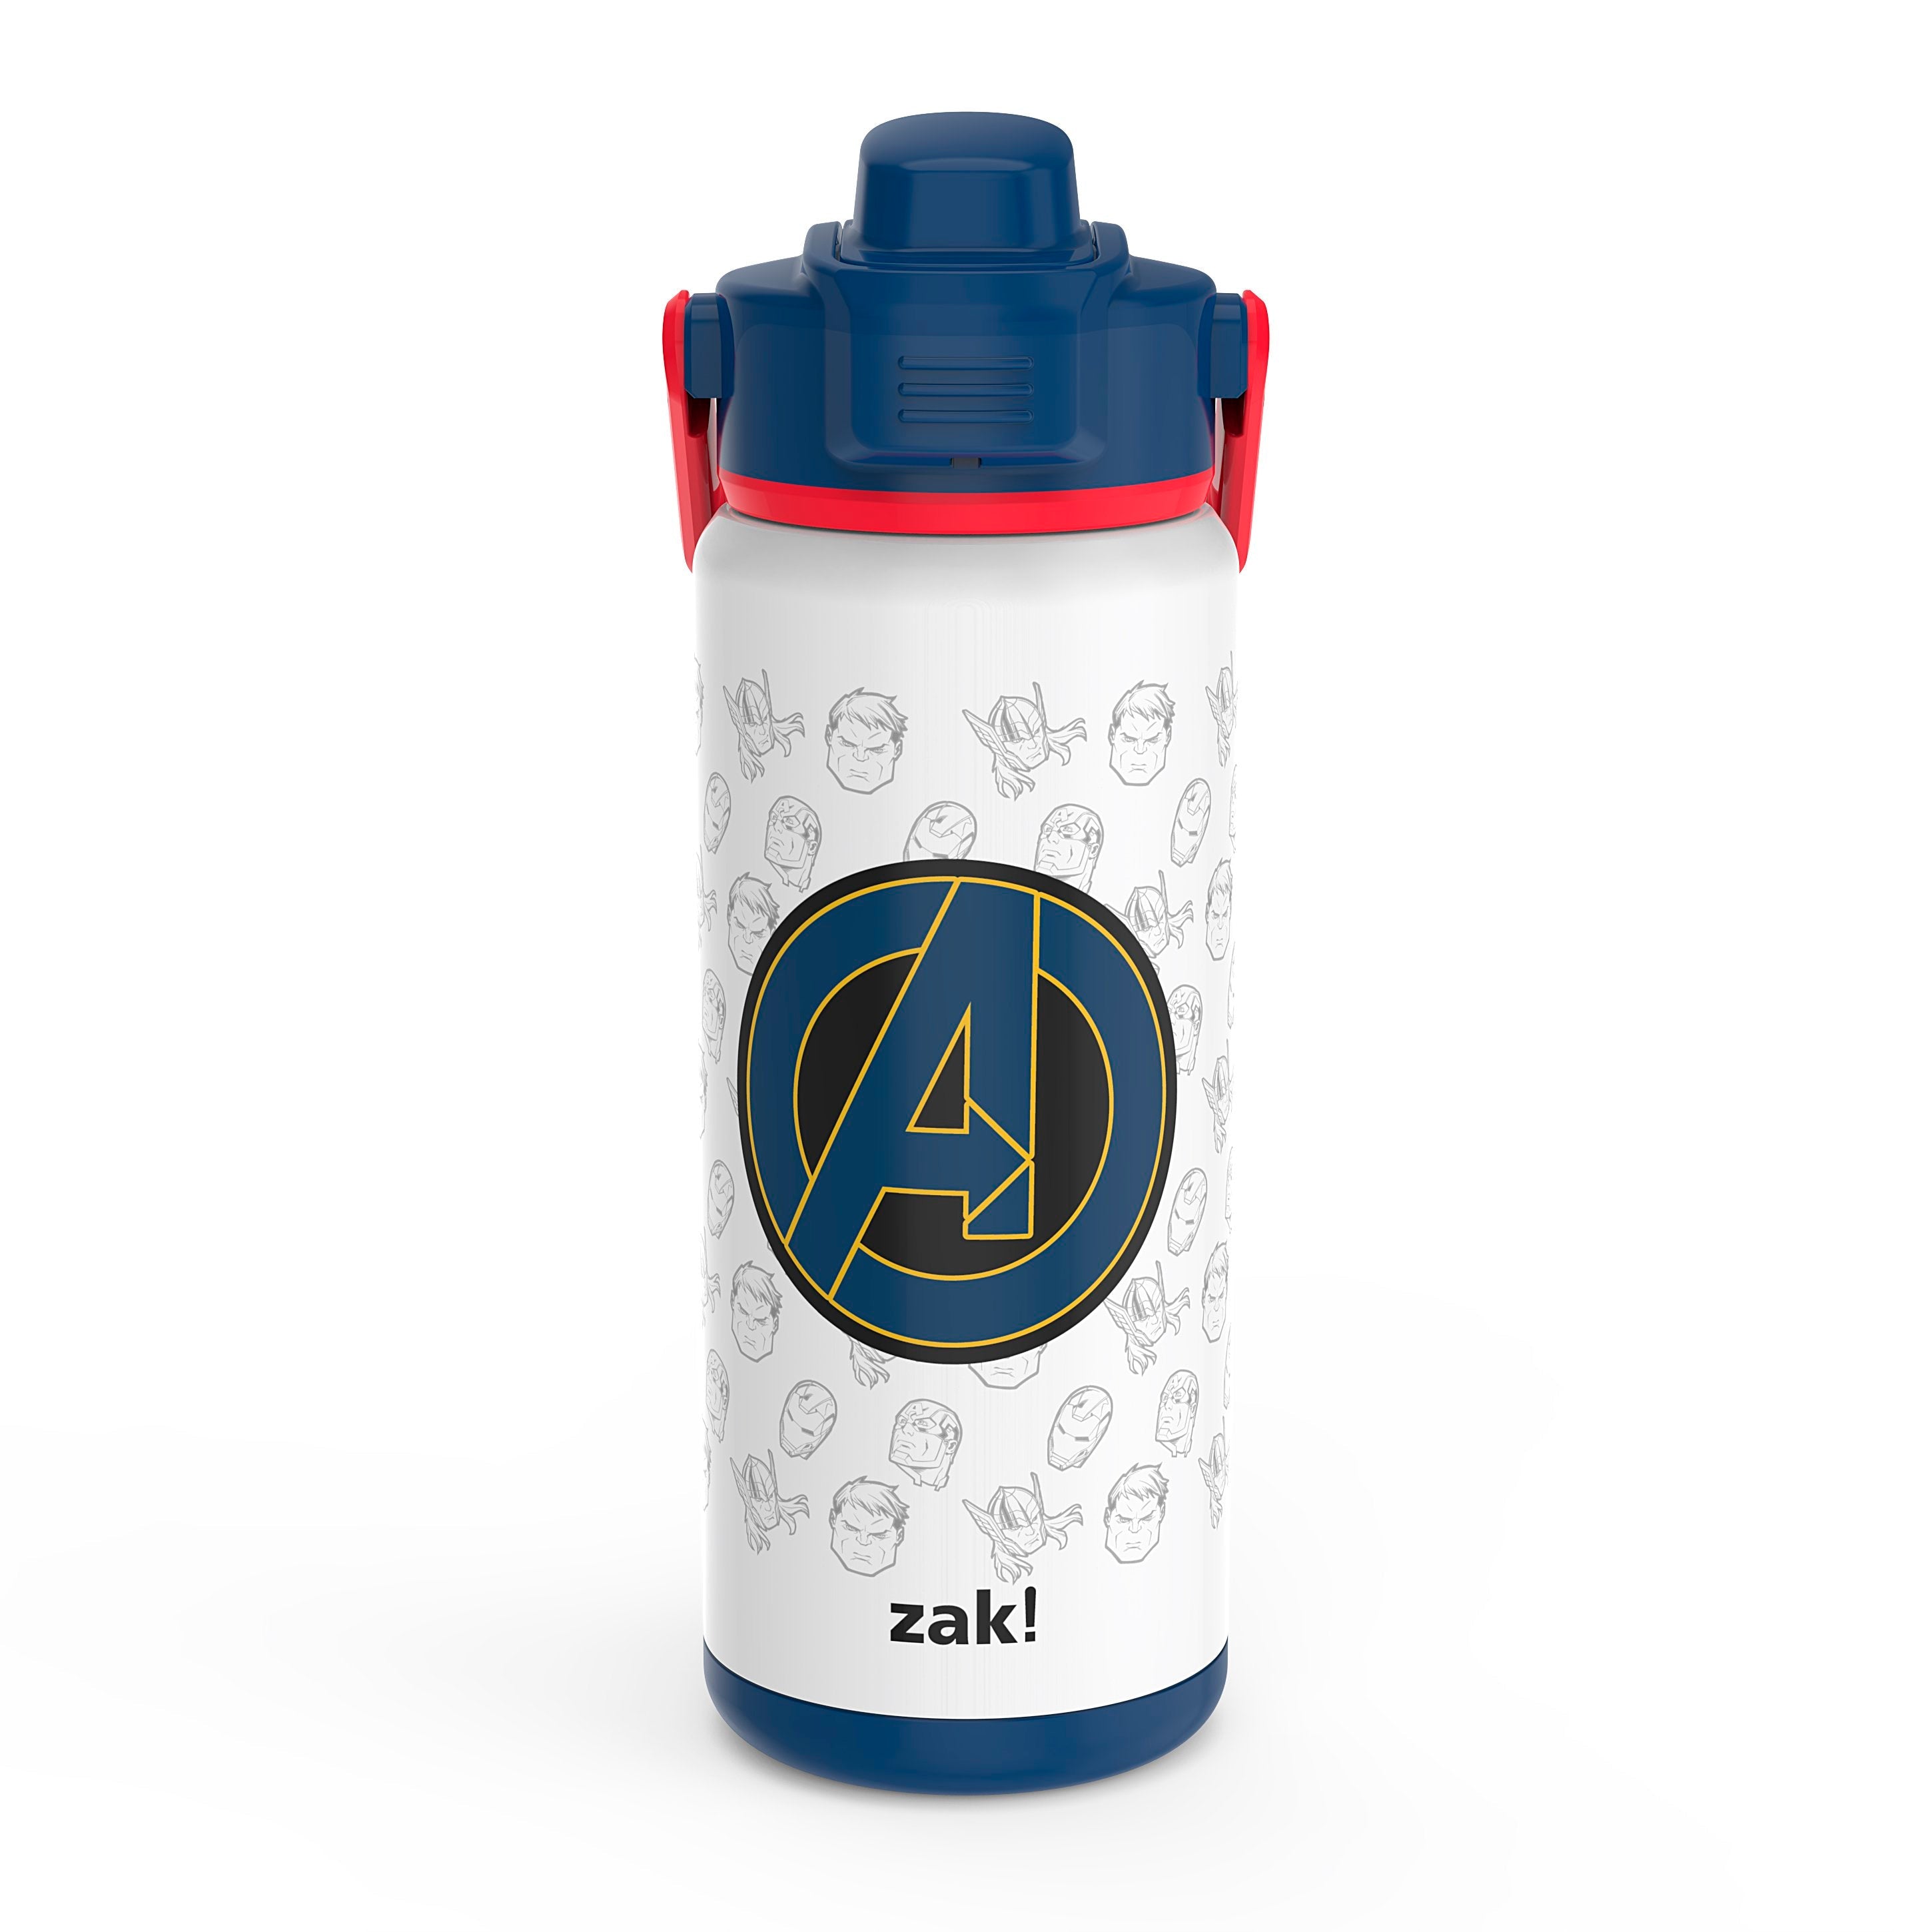 Zak Designs Harry Potter Antimicrobial 19 Ounce Stainless Steel Water Bottle,  Gryffindor, Hufflepuff, Ravenclaw, and Slytherin 